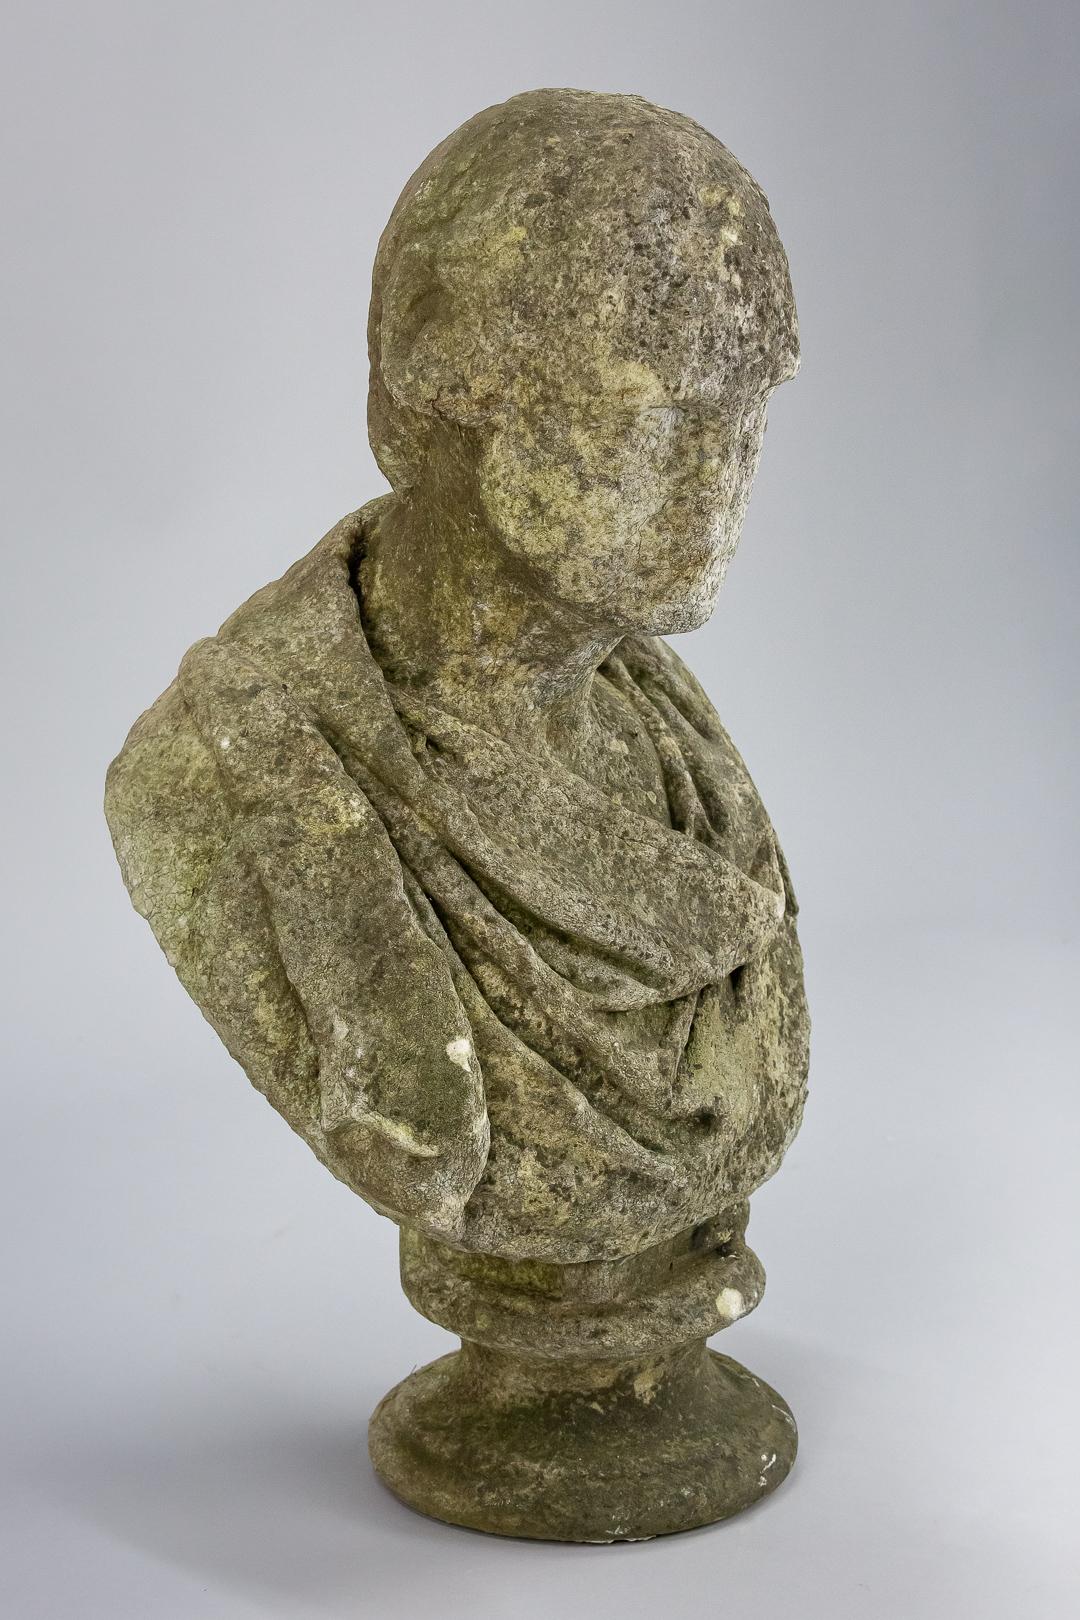 19th Century Weathered English Marble Bust In Distressed Condition In Pease pottage, West Sussex